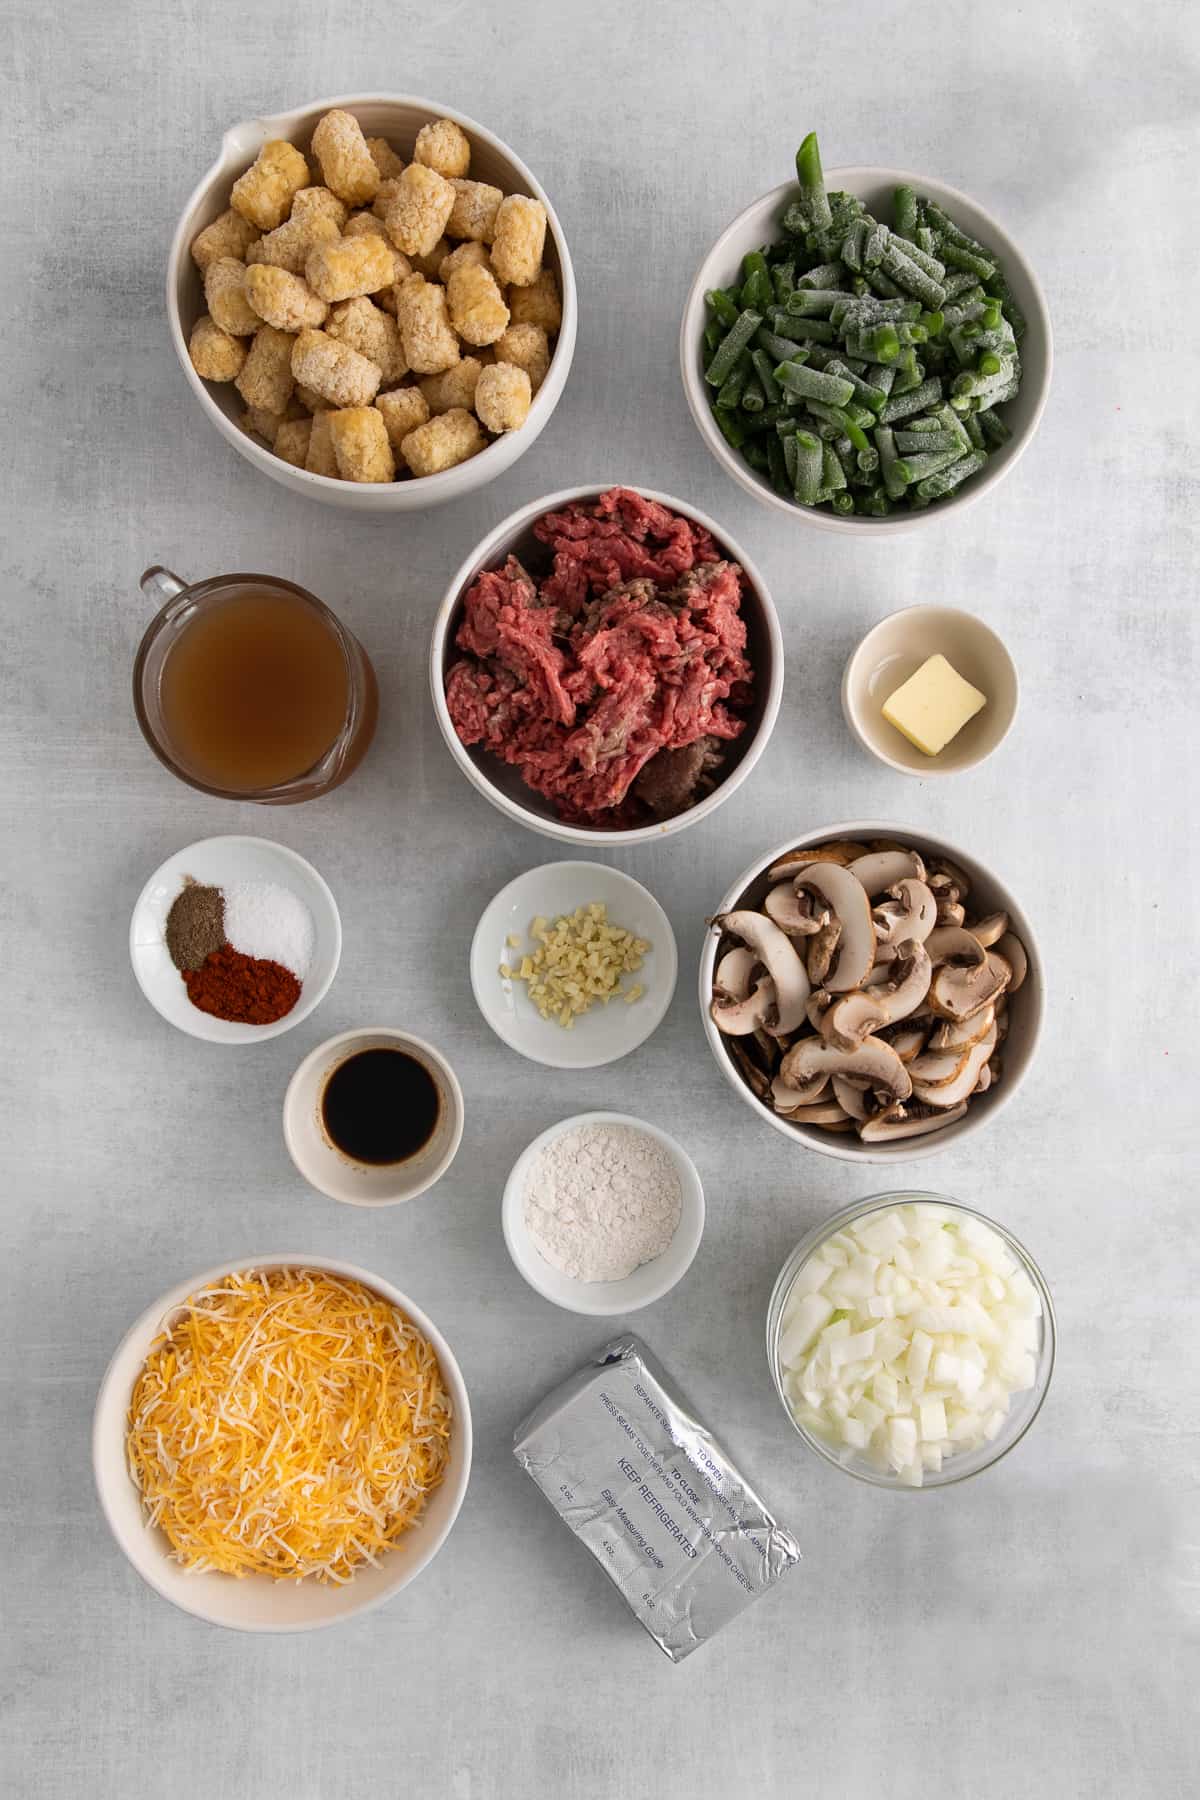 Ingredients for tater tot hot dish in bowls.